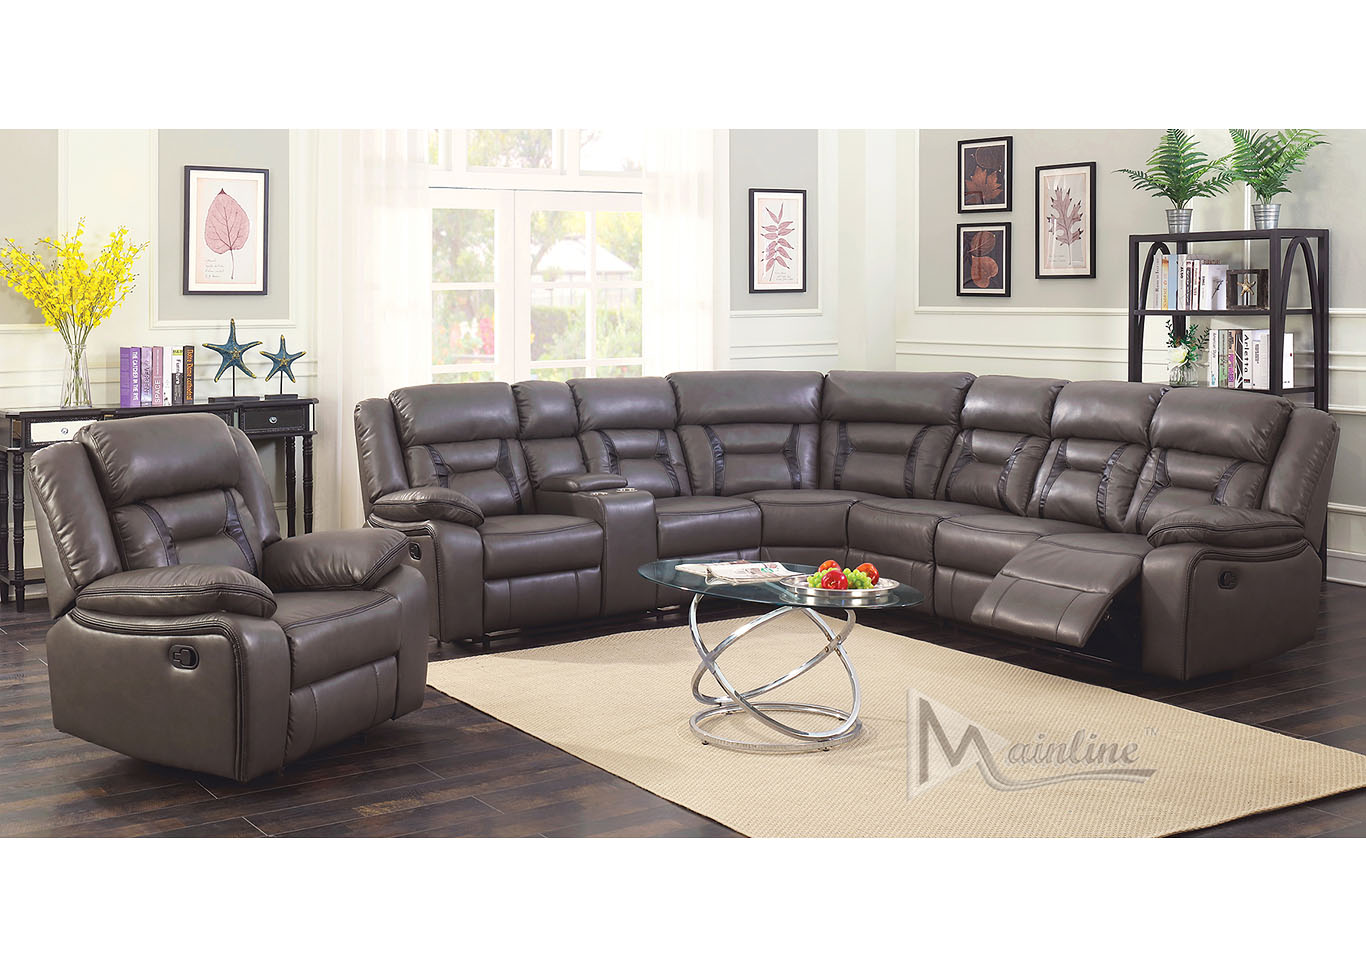 Gray 3-Piece Cha-Cha Motion Sectional,Mainline